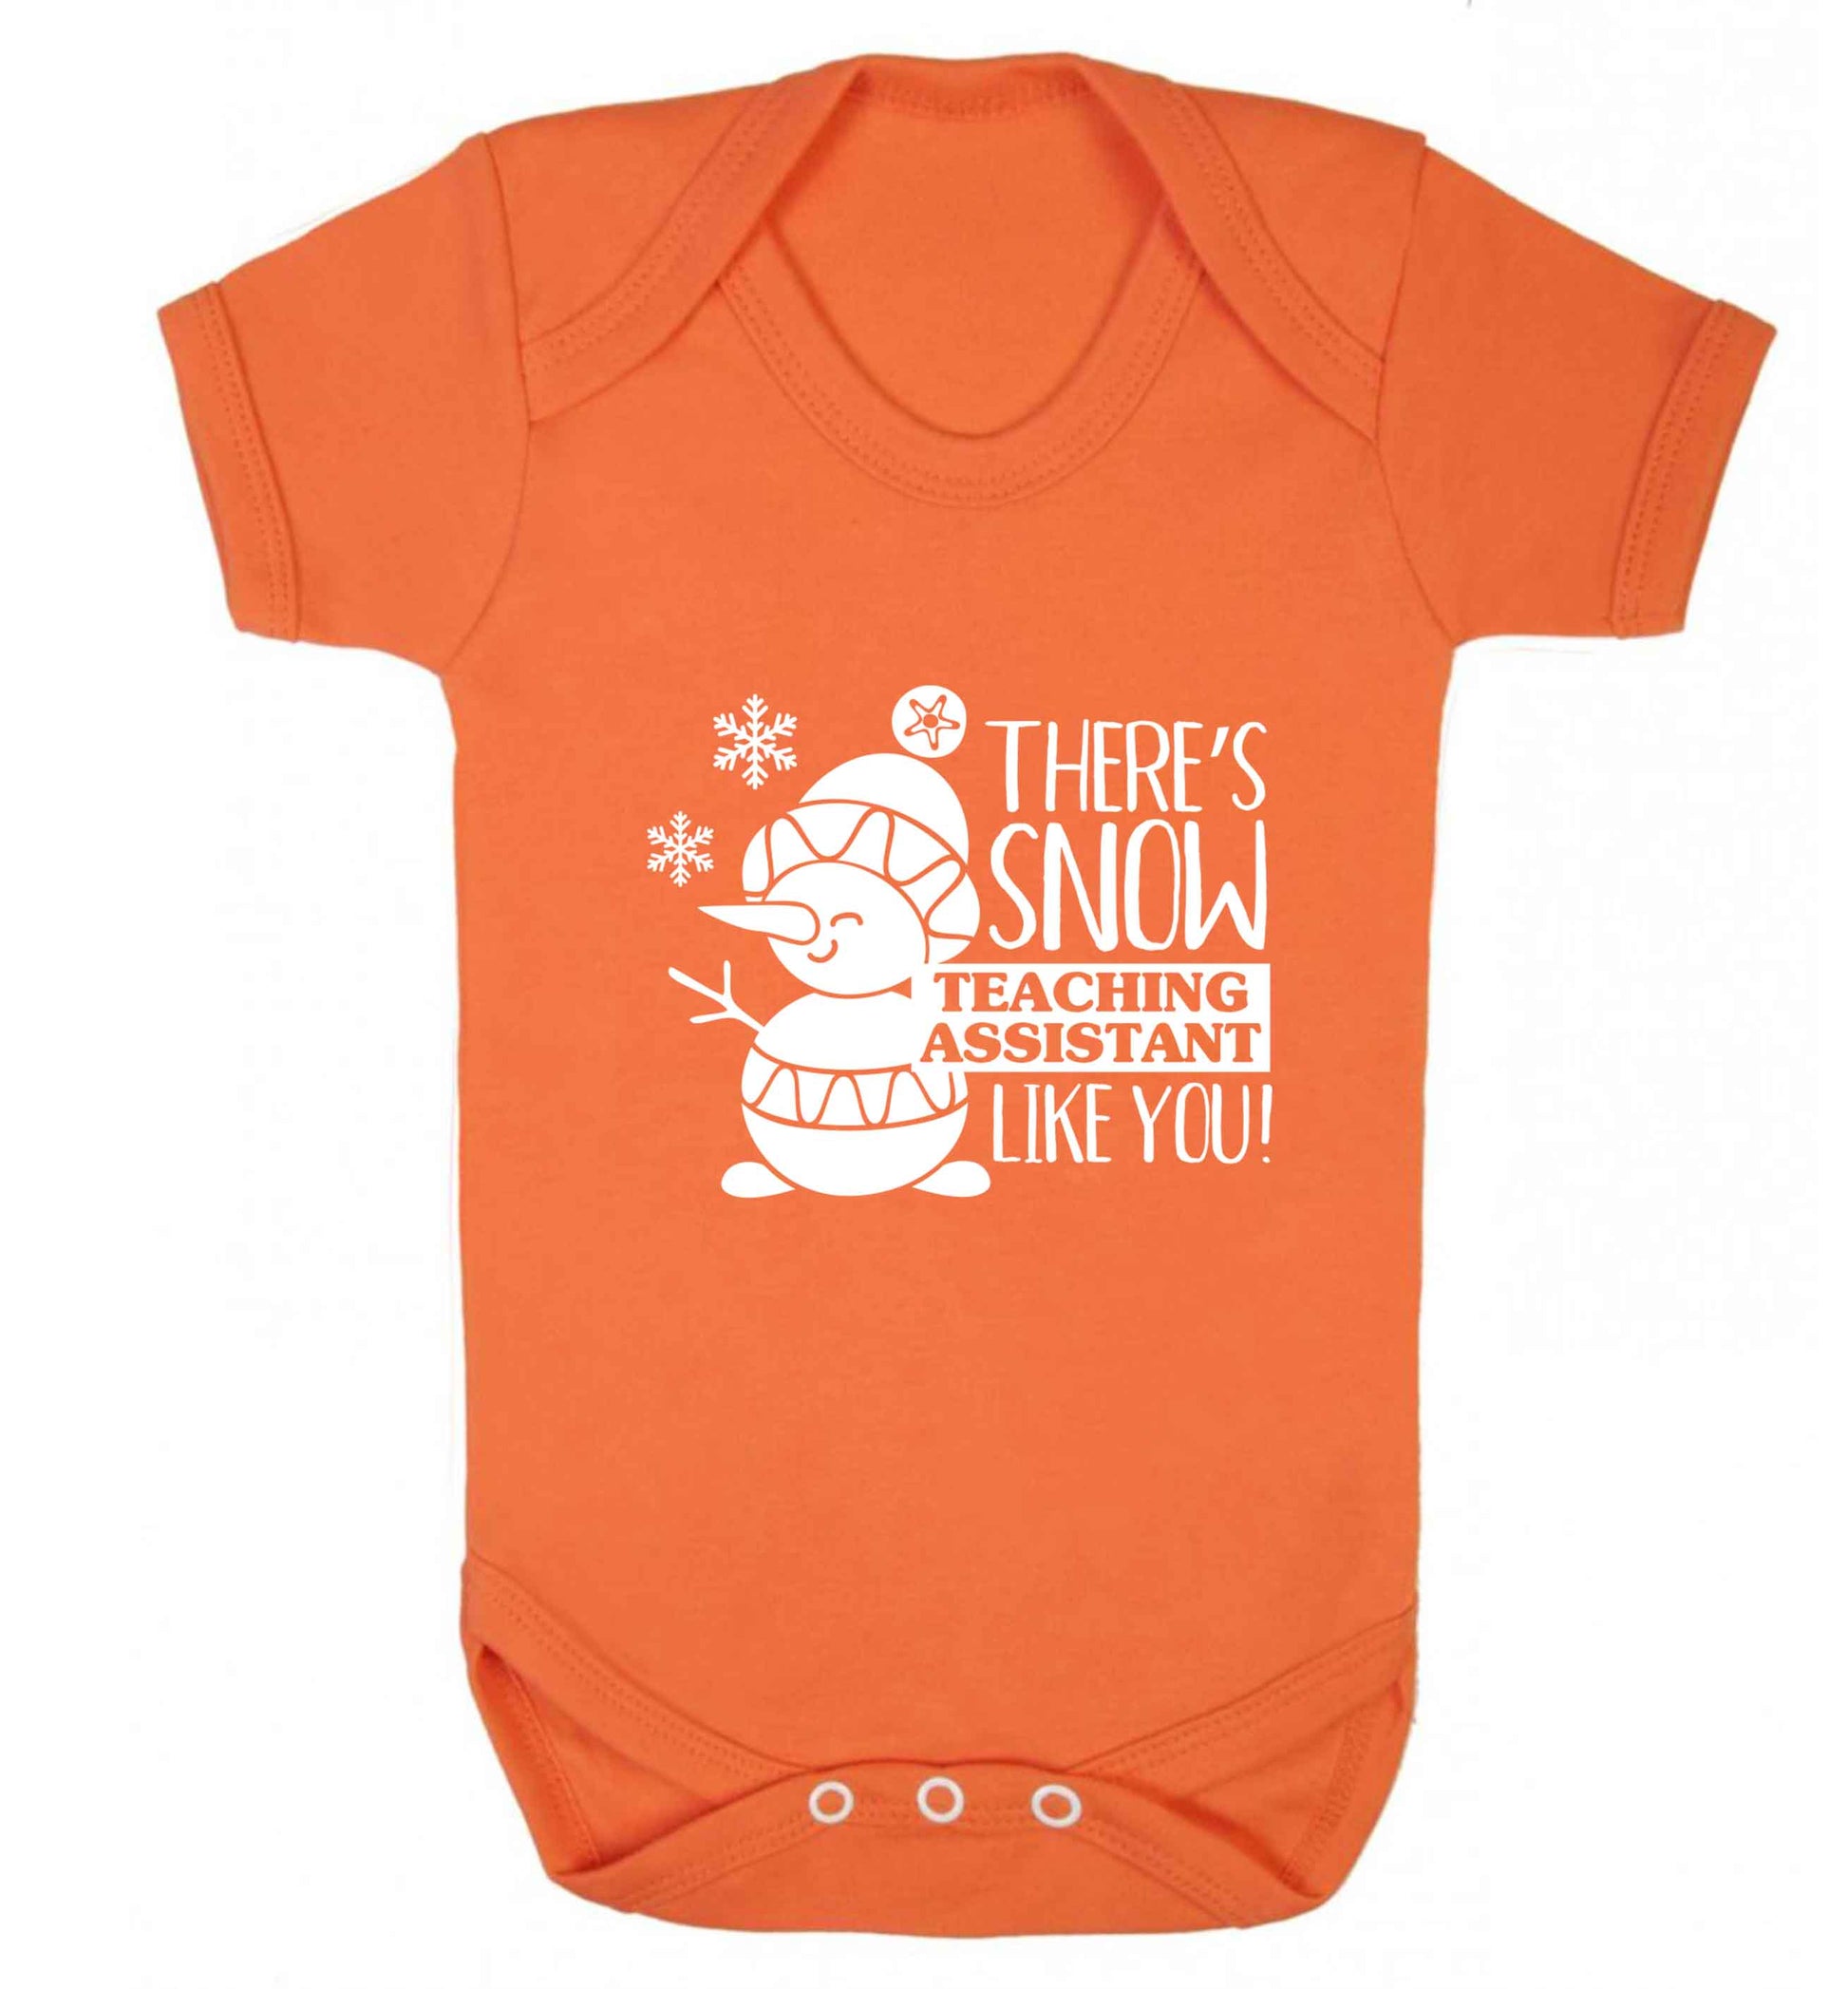 There's snow teaching assistant like you baby vest orange 18-24 months